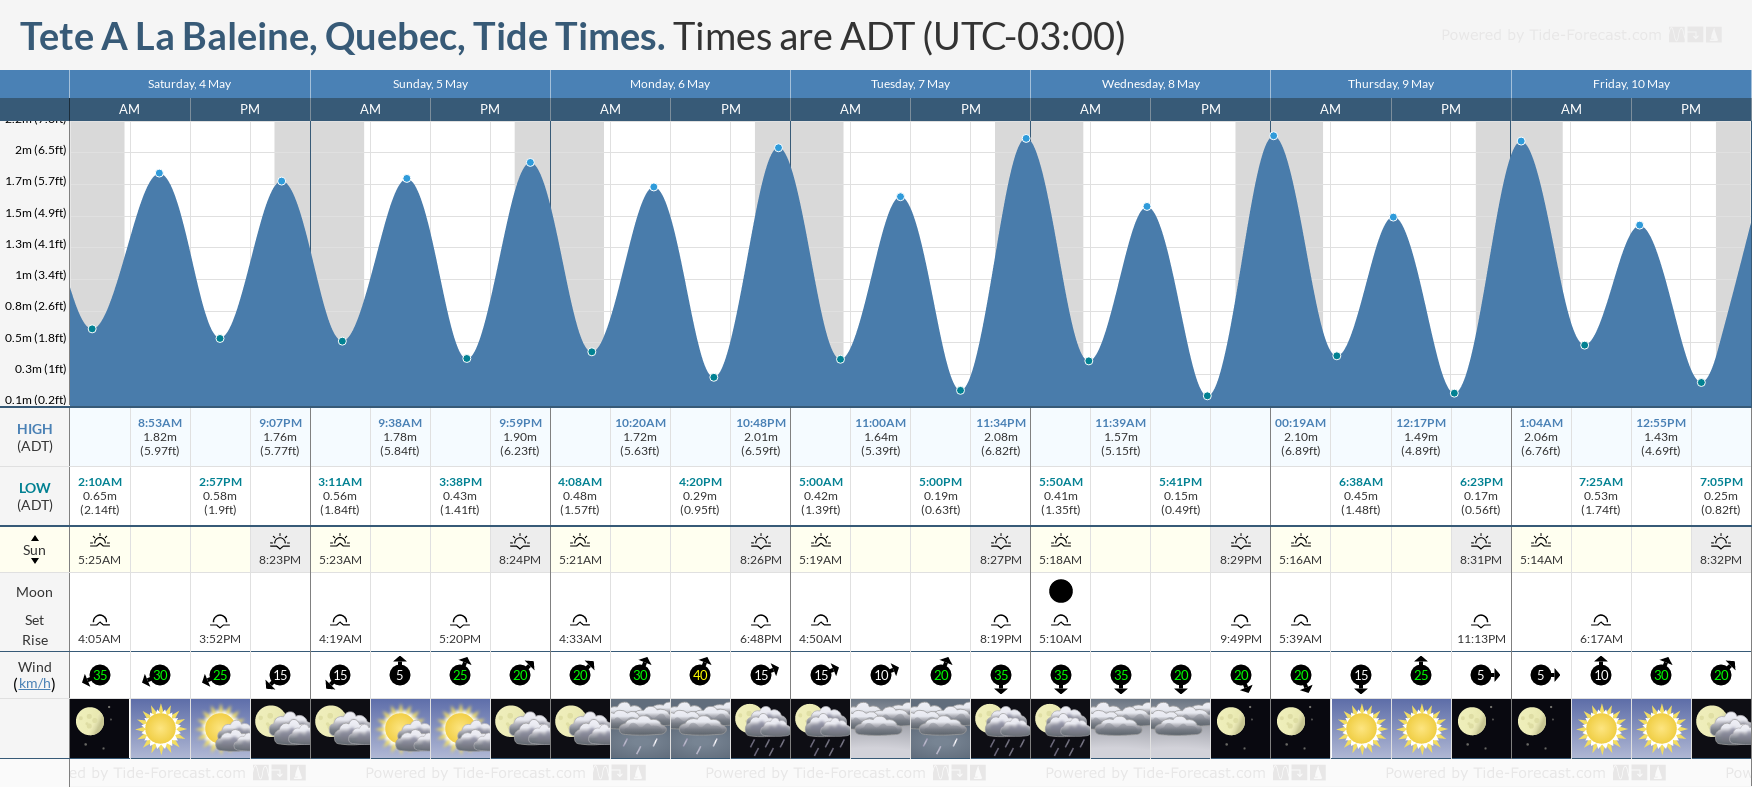 Tete A La Baleine, Quebec Tide Chart including high and low tide tide times for the next 7 days